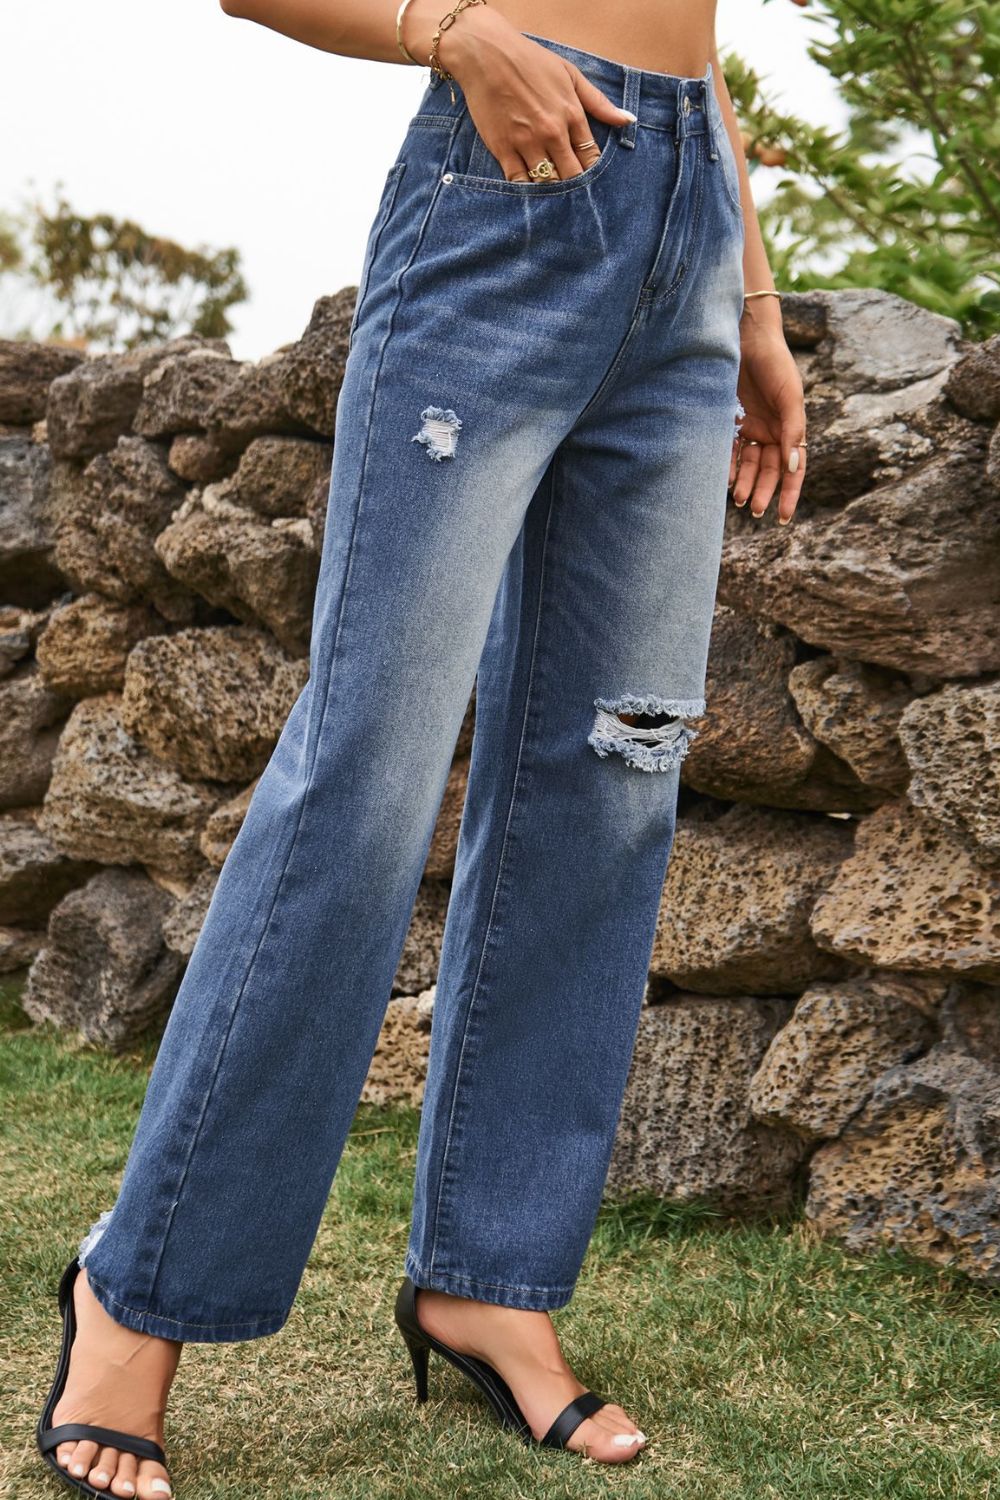 Distressed Buttoned Loose Fit Jeans Pants